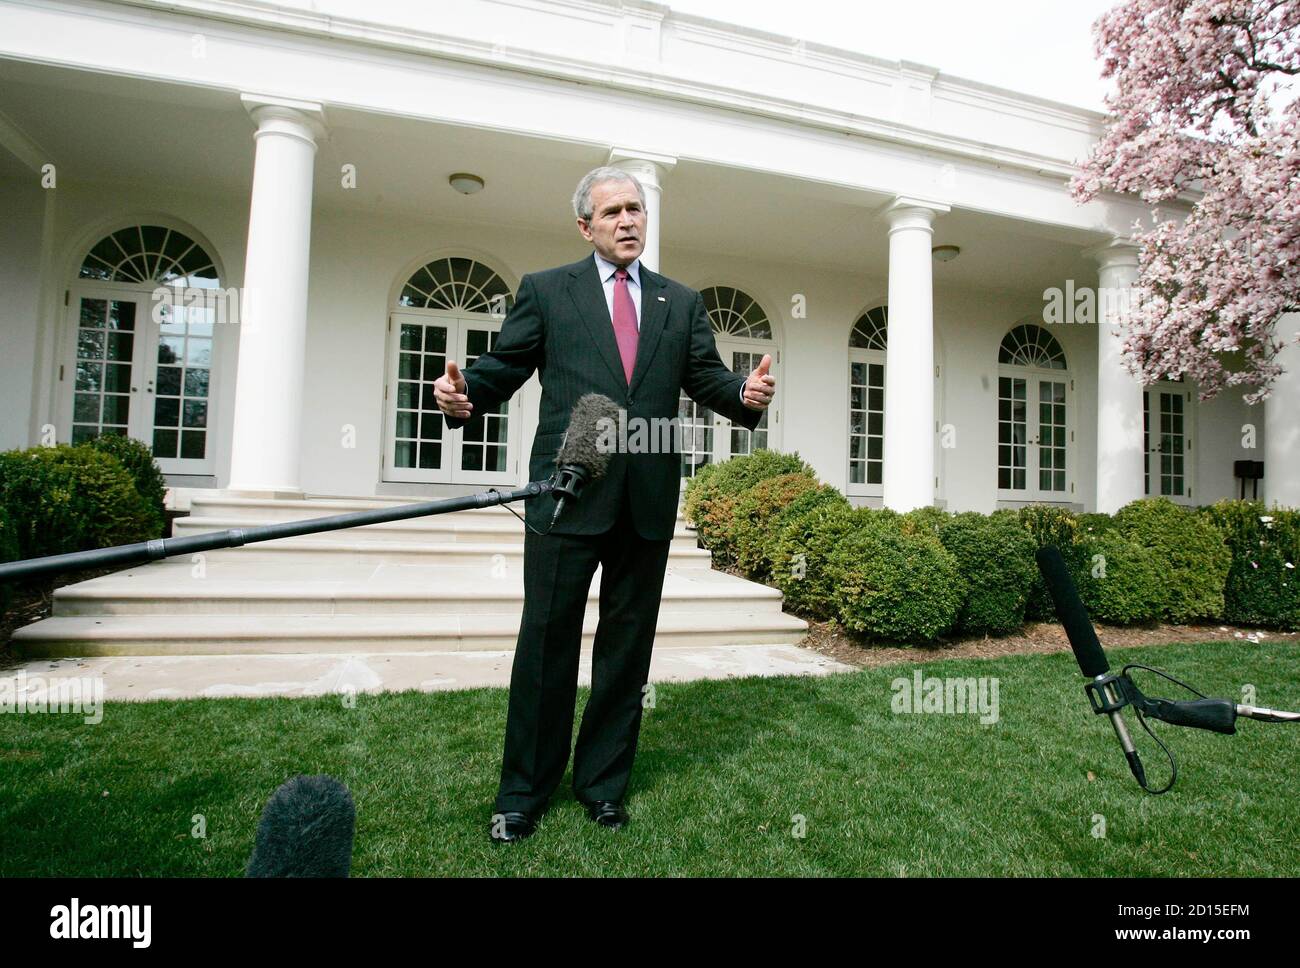 U.S. President George W. Bush talks about Press Secretary Tony Snow's phone call to him this morning informing Bush of his reoccurring cancer while in the Rose Garden of the White House in Washington March 27, 2007.    REUTERS/Larry Downing (UNITED STATES) Stock Photo